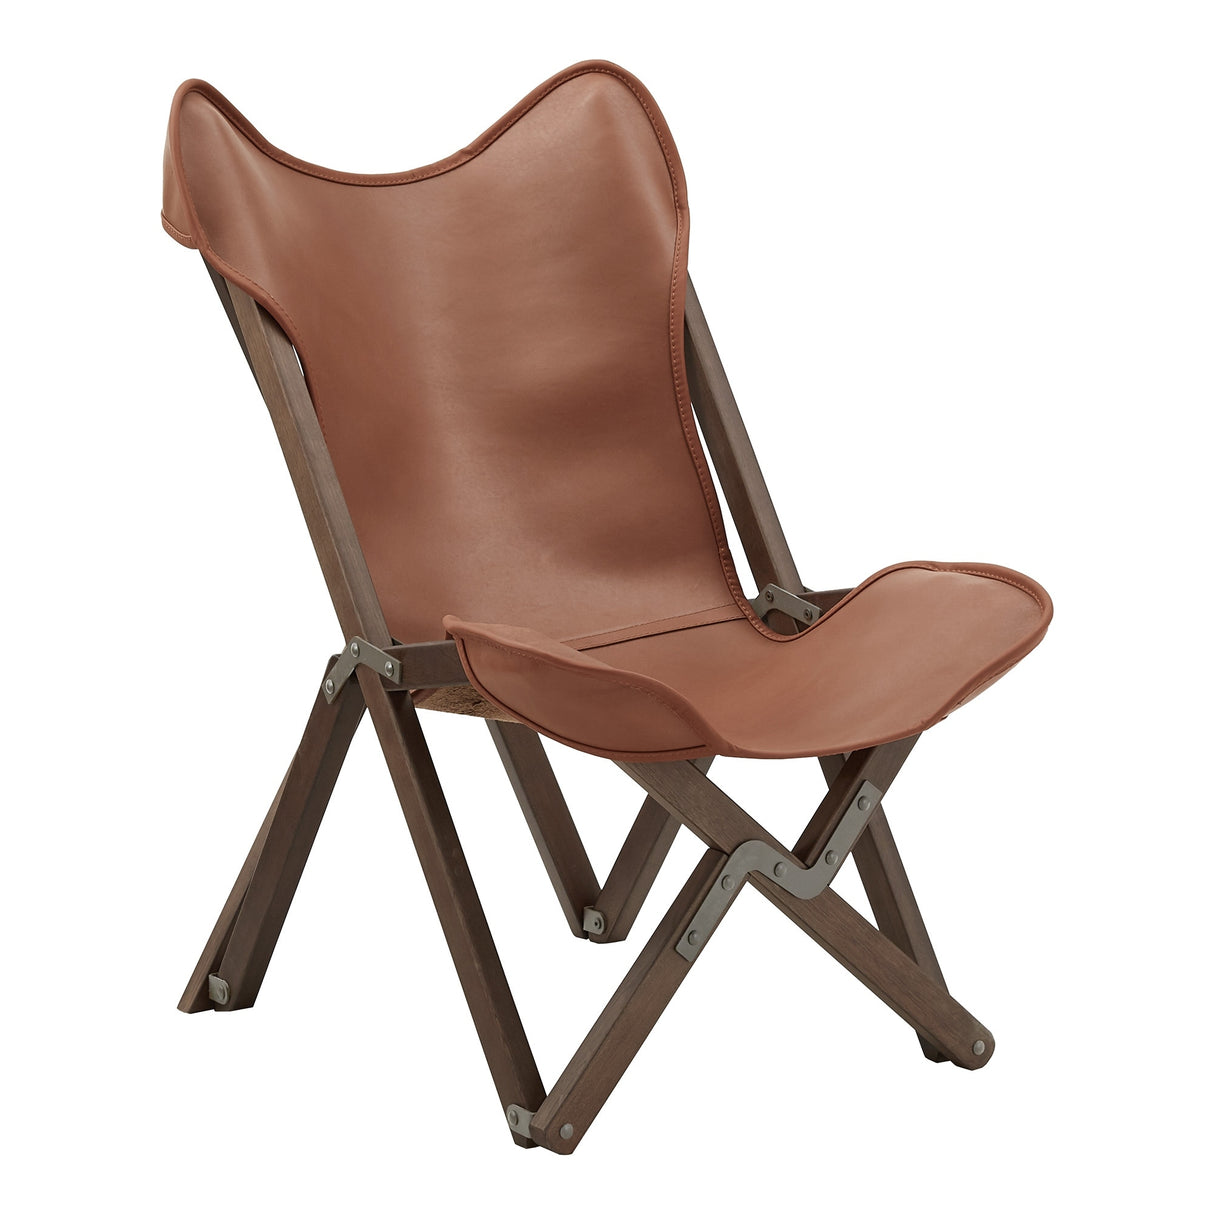 Cantu Genuine Top Grain Leather Tripolina Sling Chair by iNSPIRE Q Modern